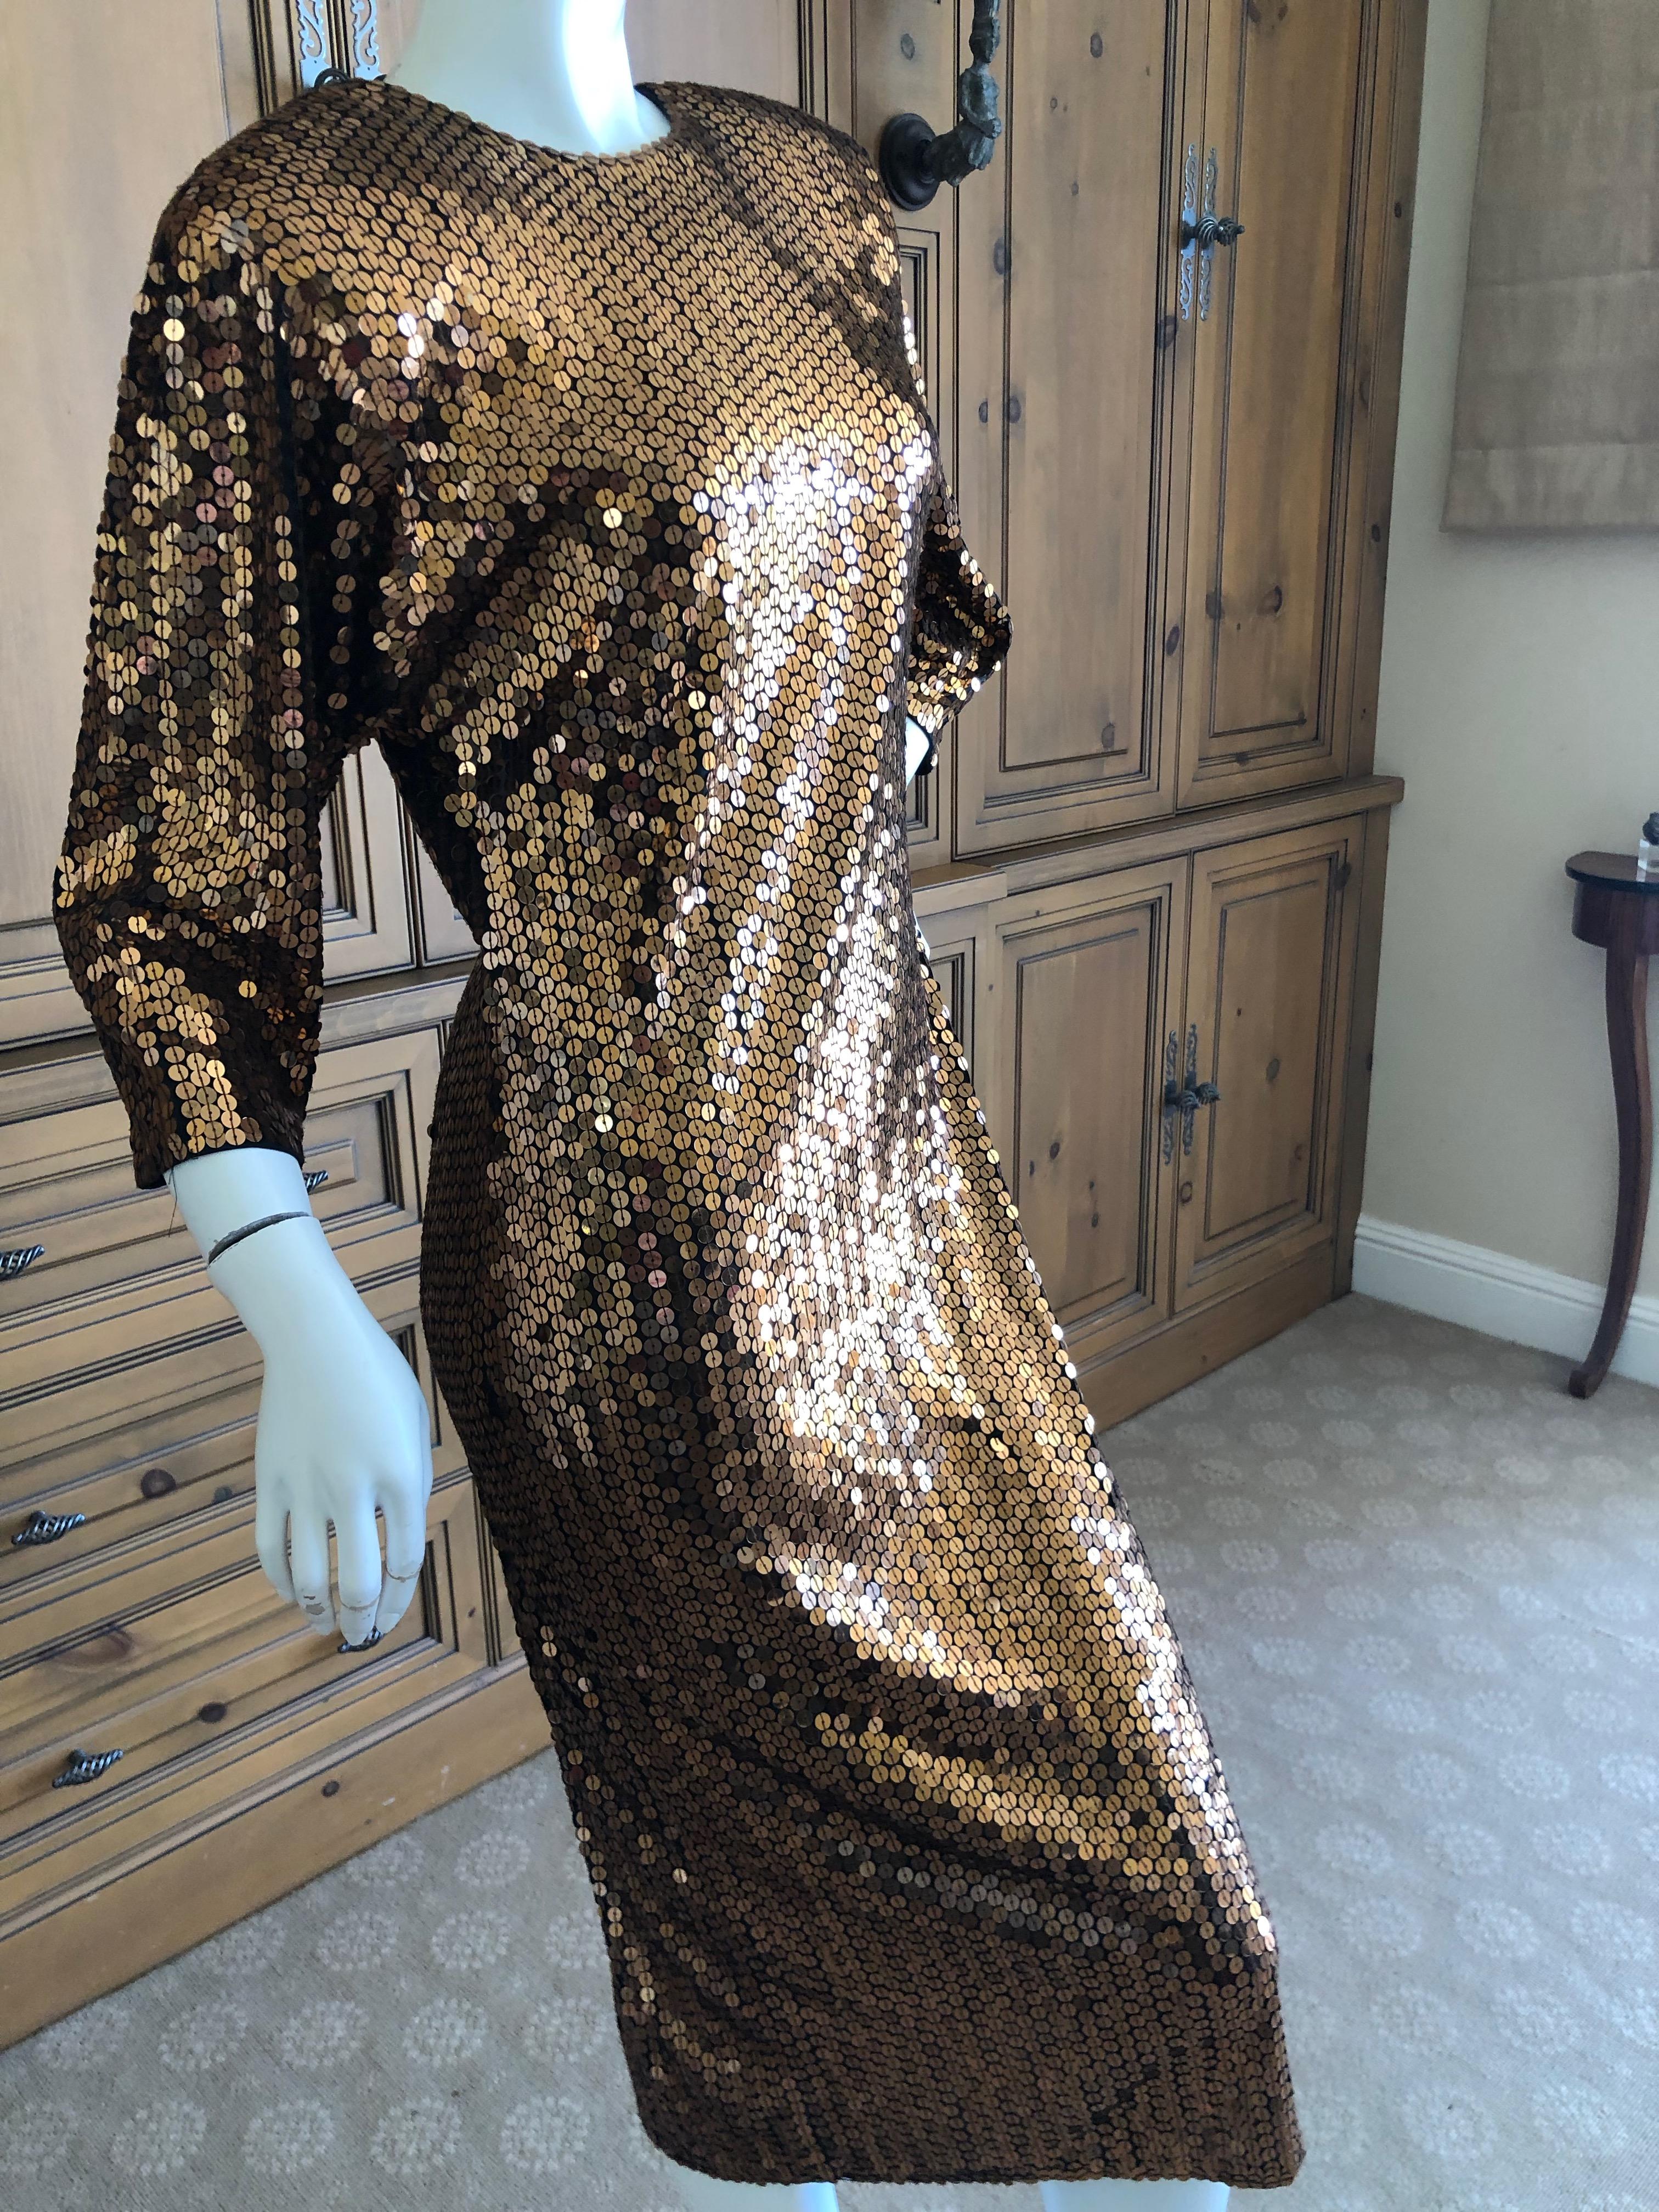 Oleg Cassini 1970's Sequin Disco Era Dress.
This is such a classic example of disco dressing.
Vintage size 10
Bust 38